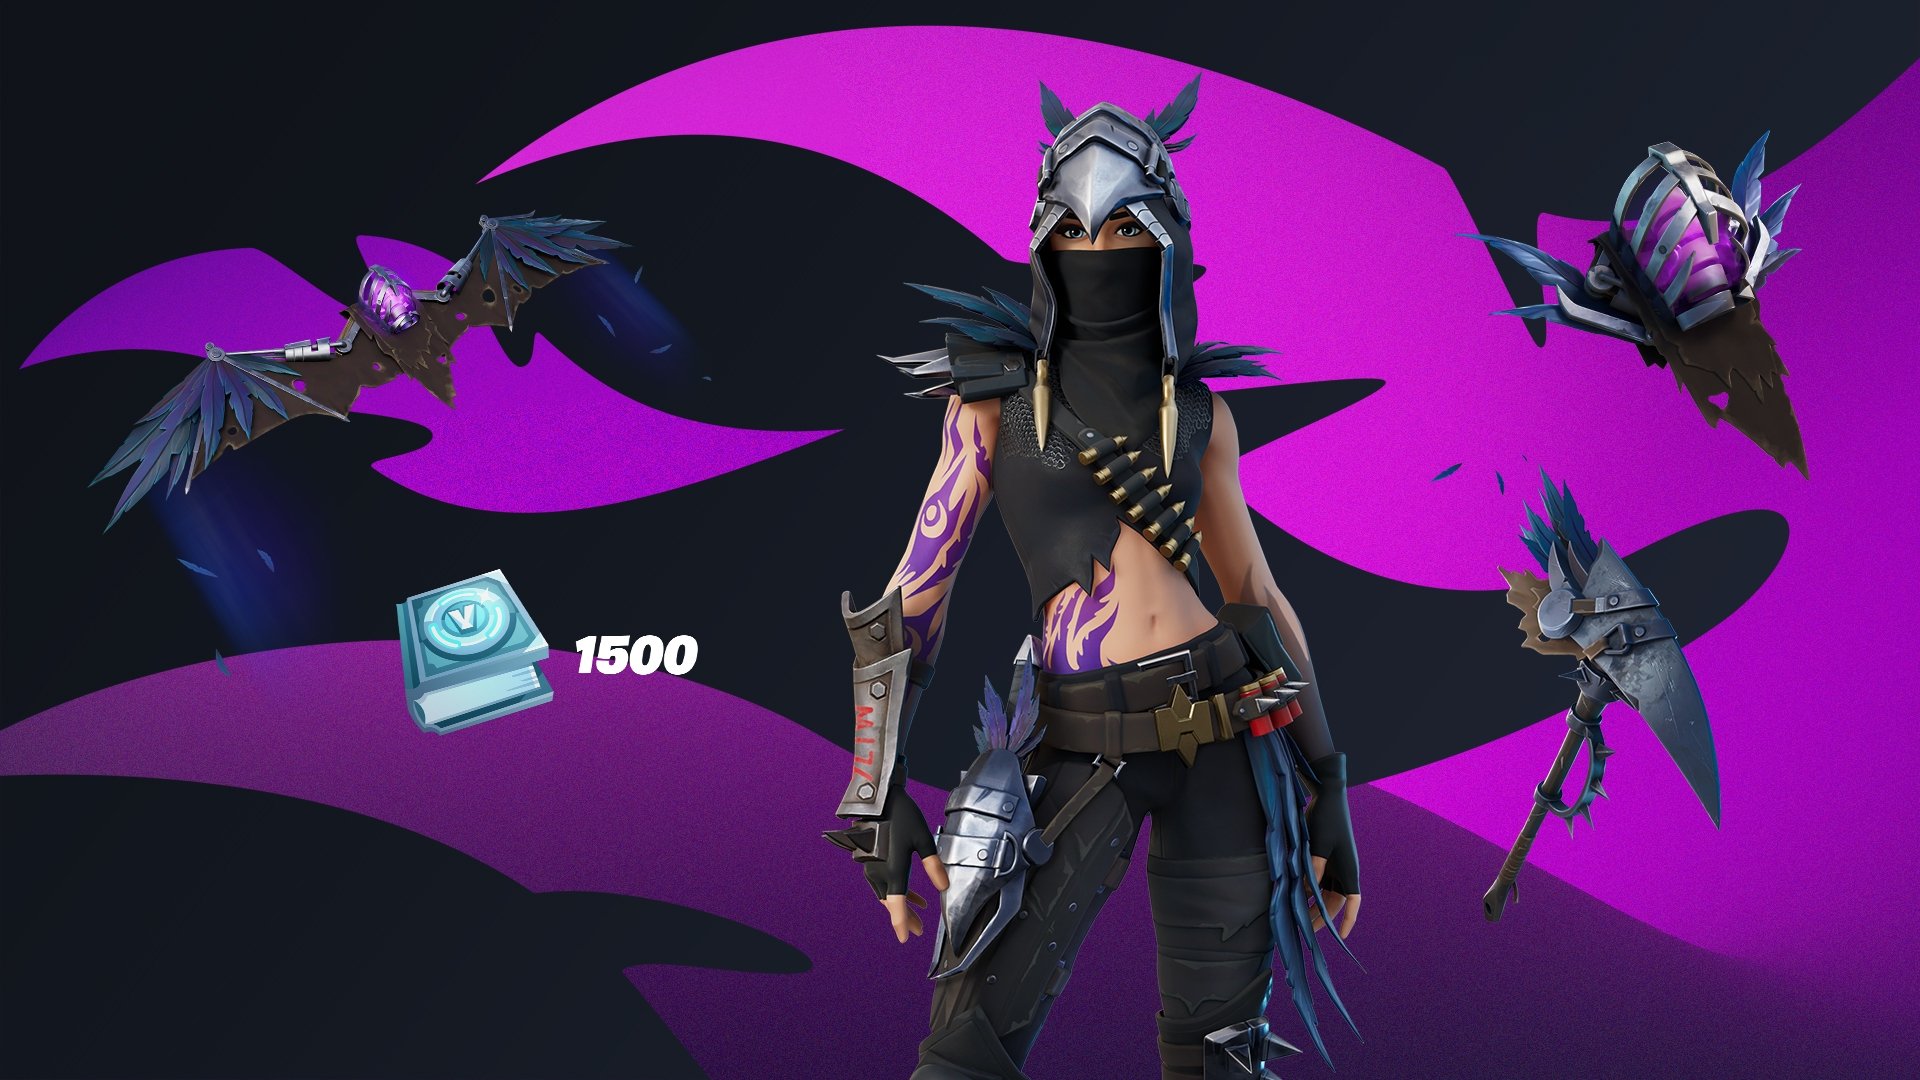 Fnassist on the witching wing vbucks quest pack is now available in the fortnite item shop includes